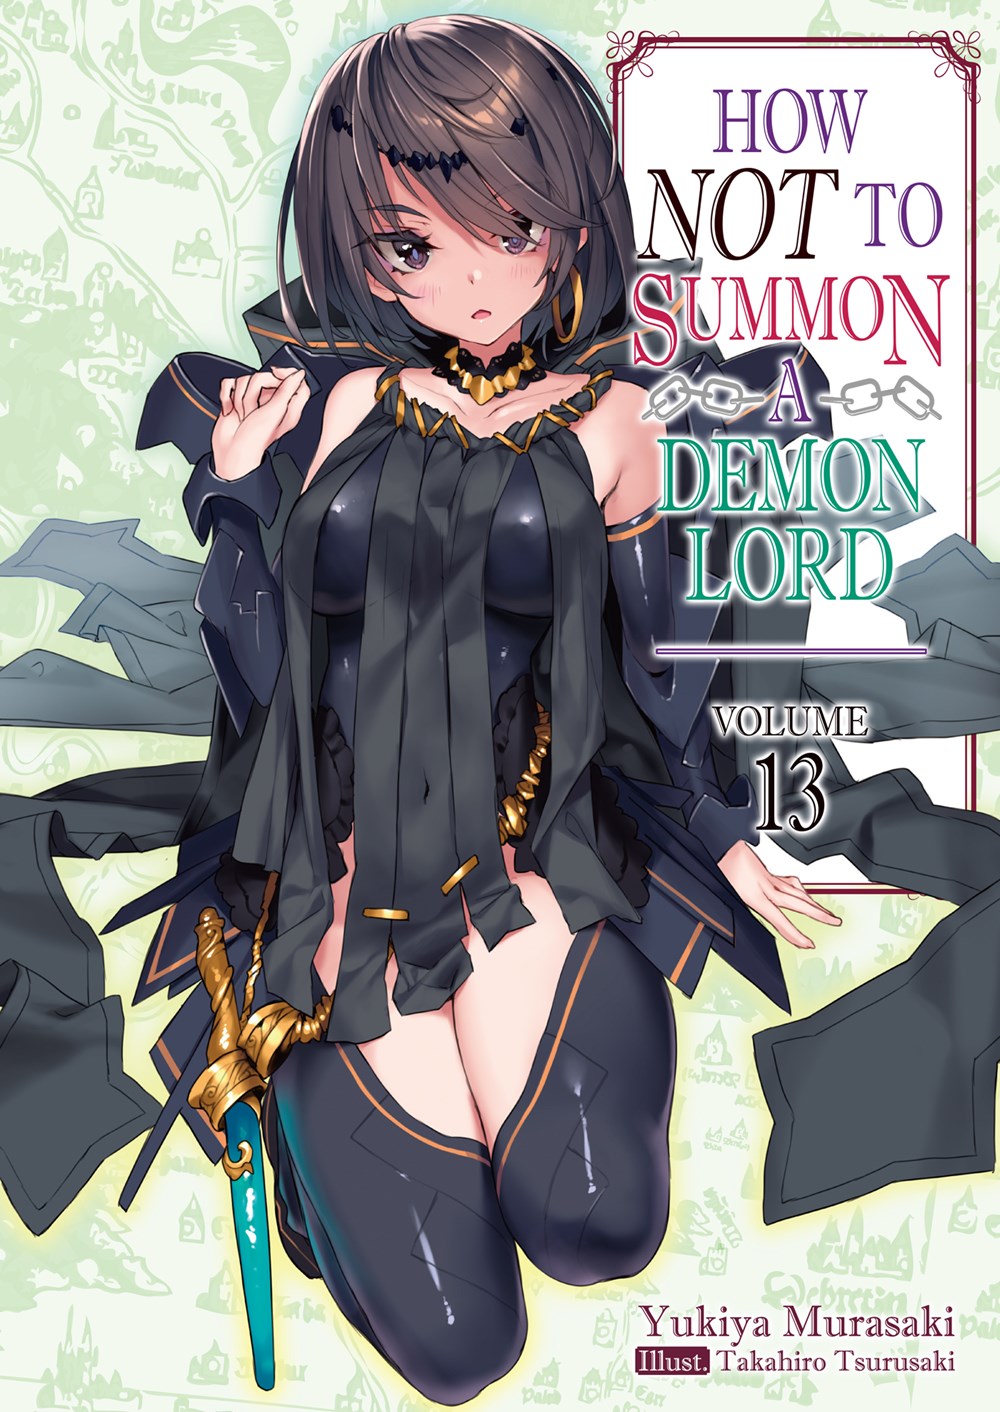 myReviewer.com - Review for How NOT to Summon a Demon Lord - Season 2